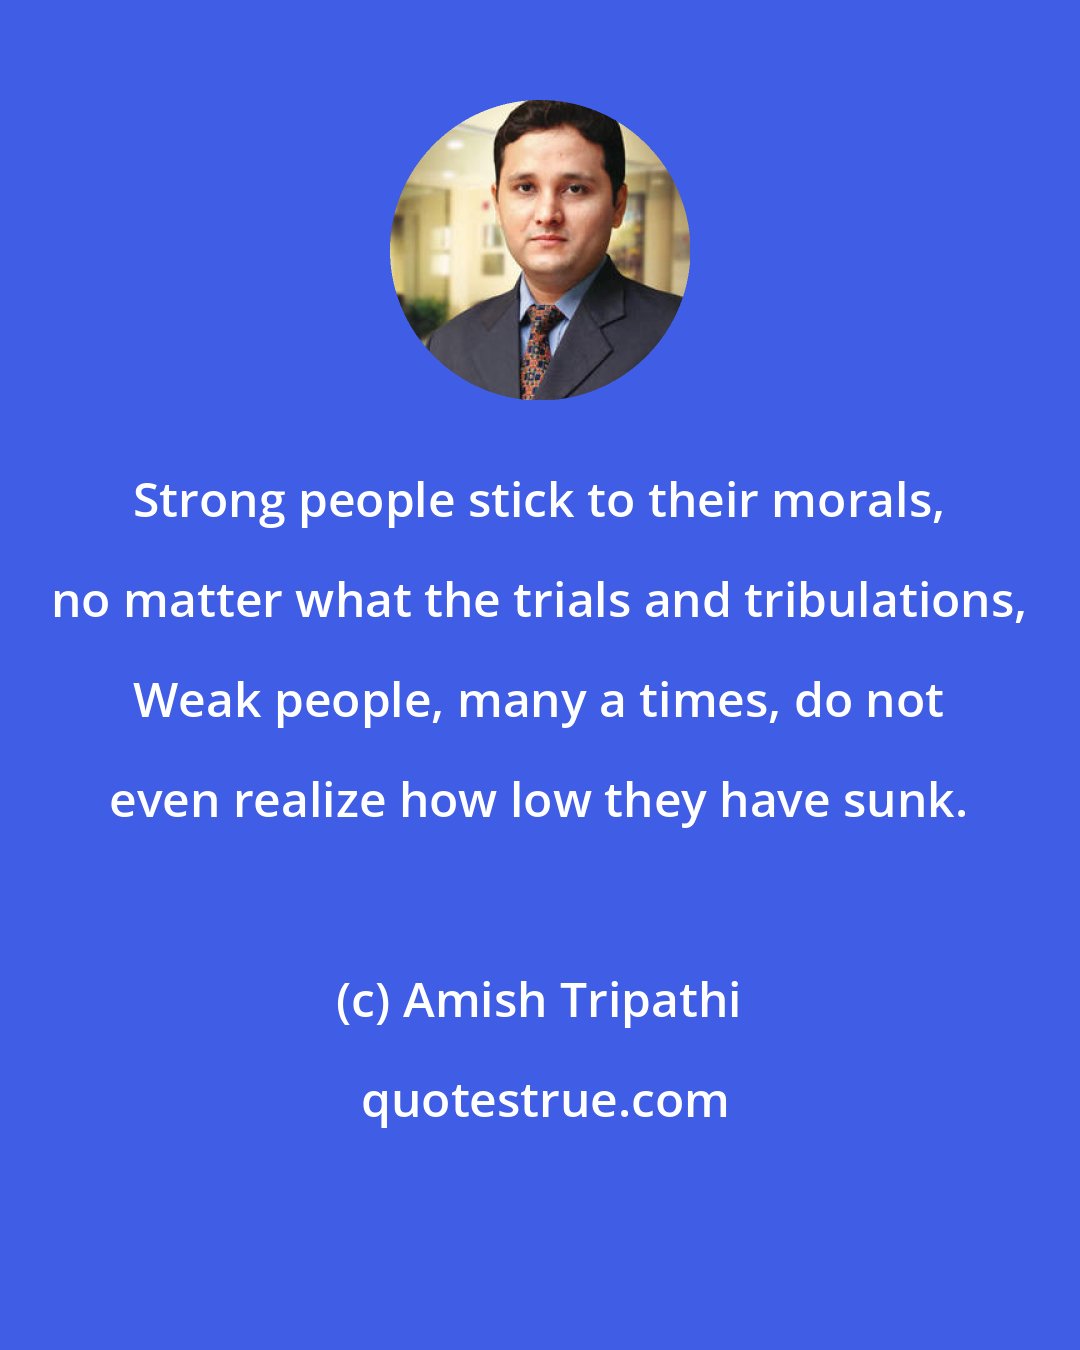 Amish Tripathi: Strong people stick to their morals, no matter what the trials and tribulations, Weak people, many a times, do not even realize how low they have sunk.